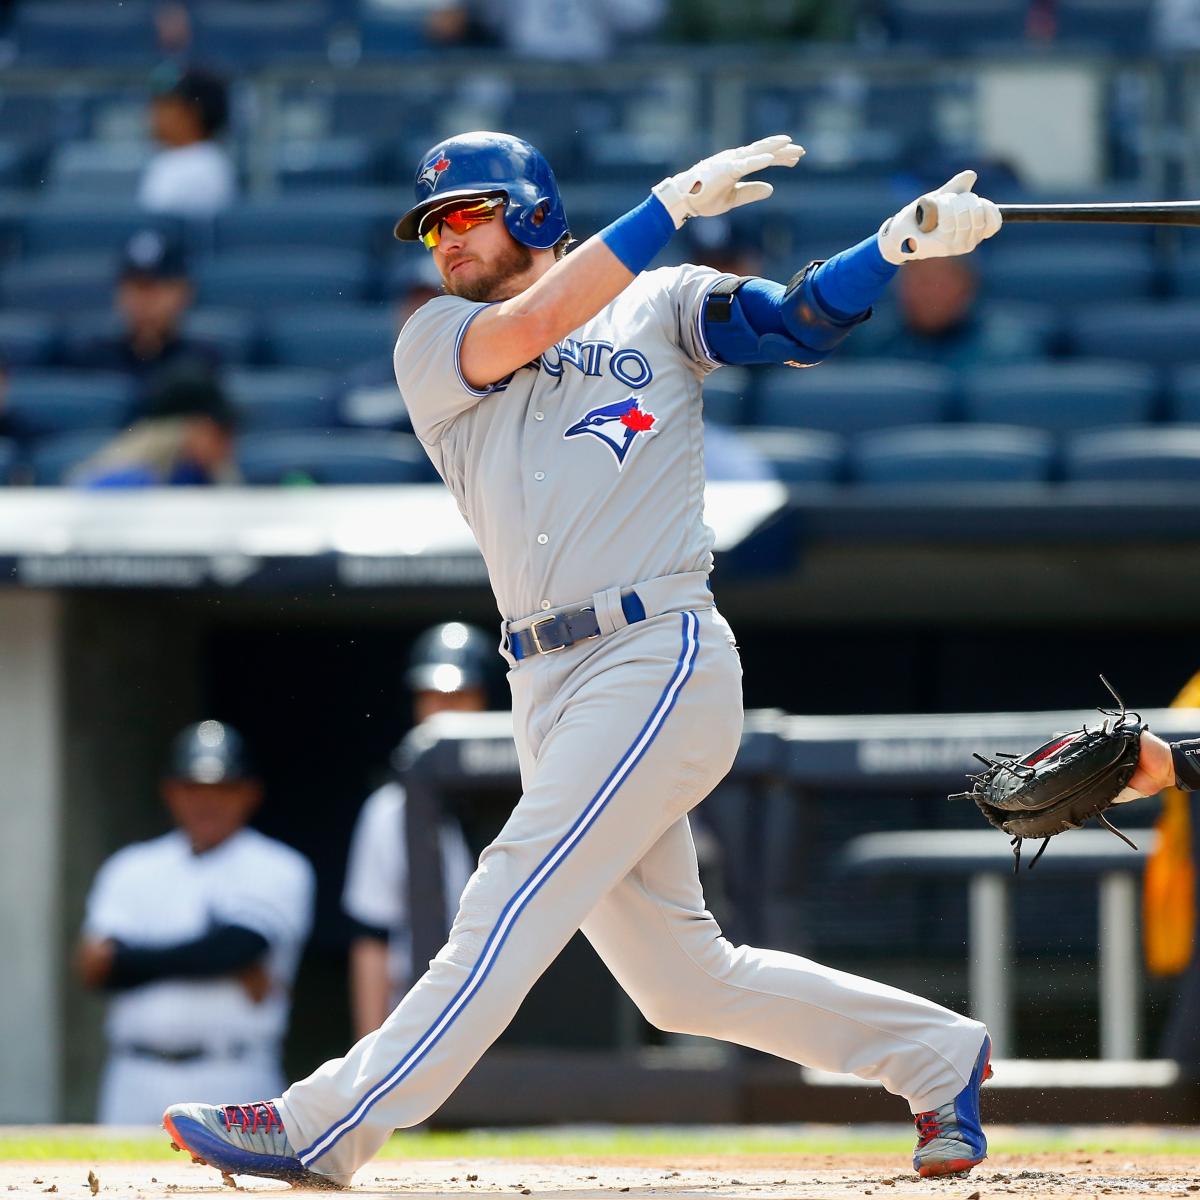 Josh Donaldson and the Curse of the No. 24 Jersey - Zone Coverage